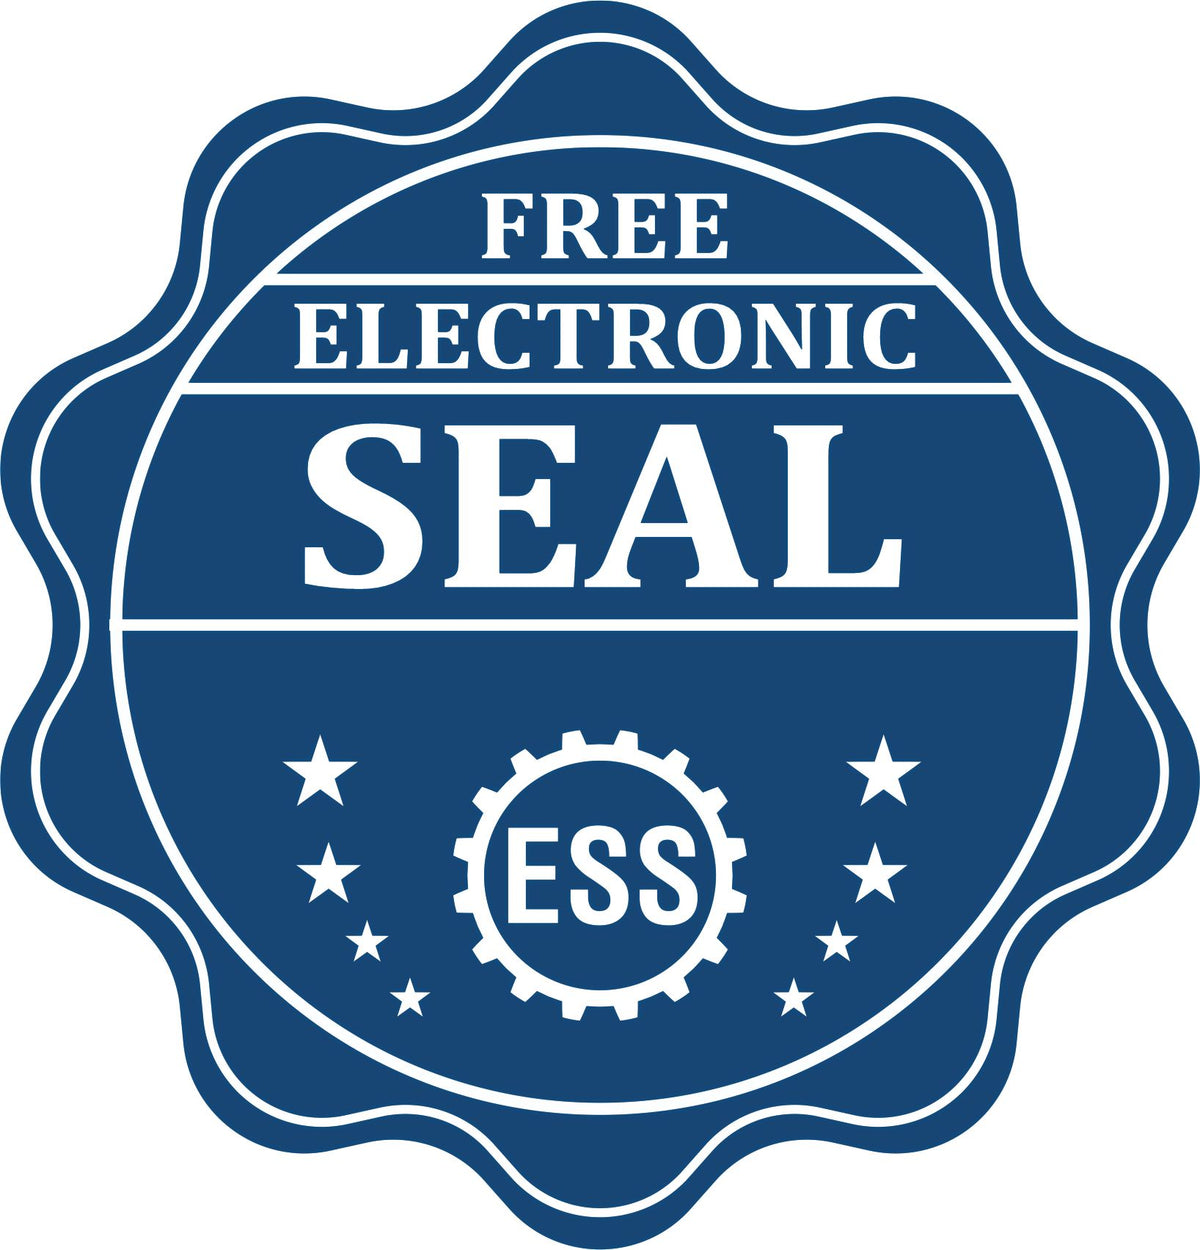 A badge showing a free electronic seal for the Slim Pre-Inked Guam Architect Seal Stamp with stars and the ESS gear on the emblem.